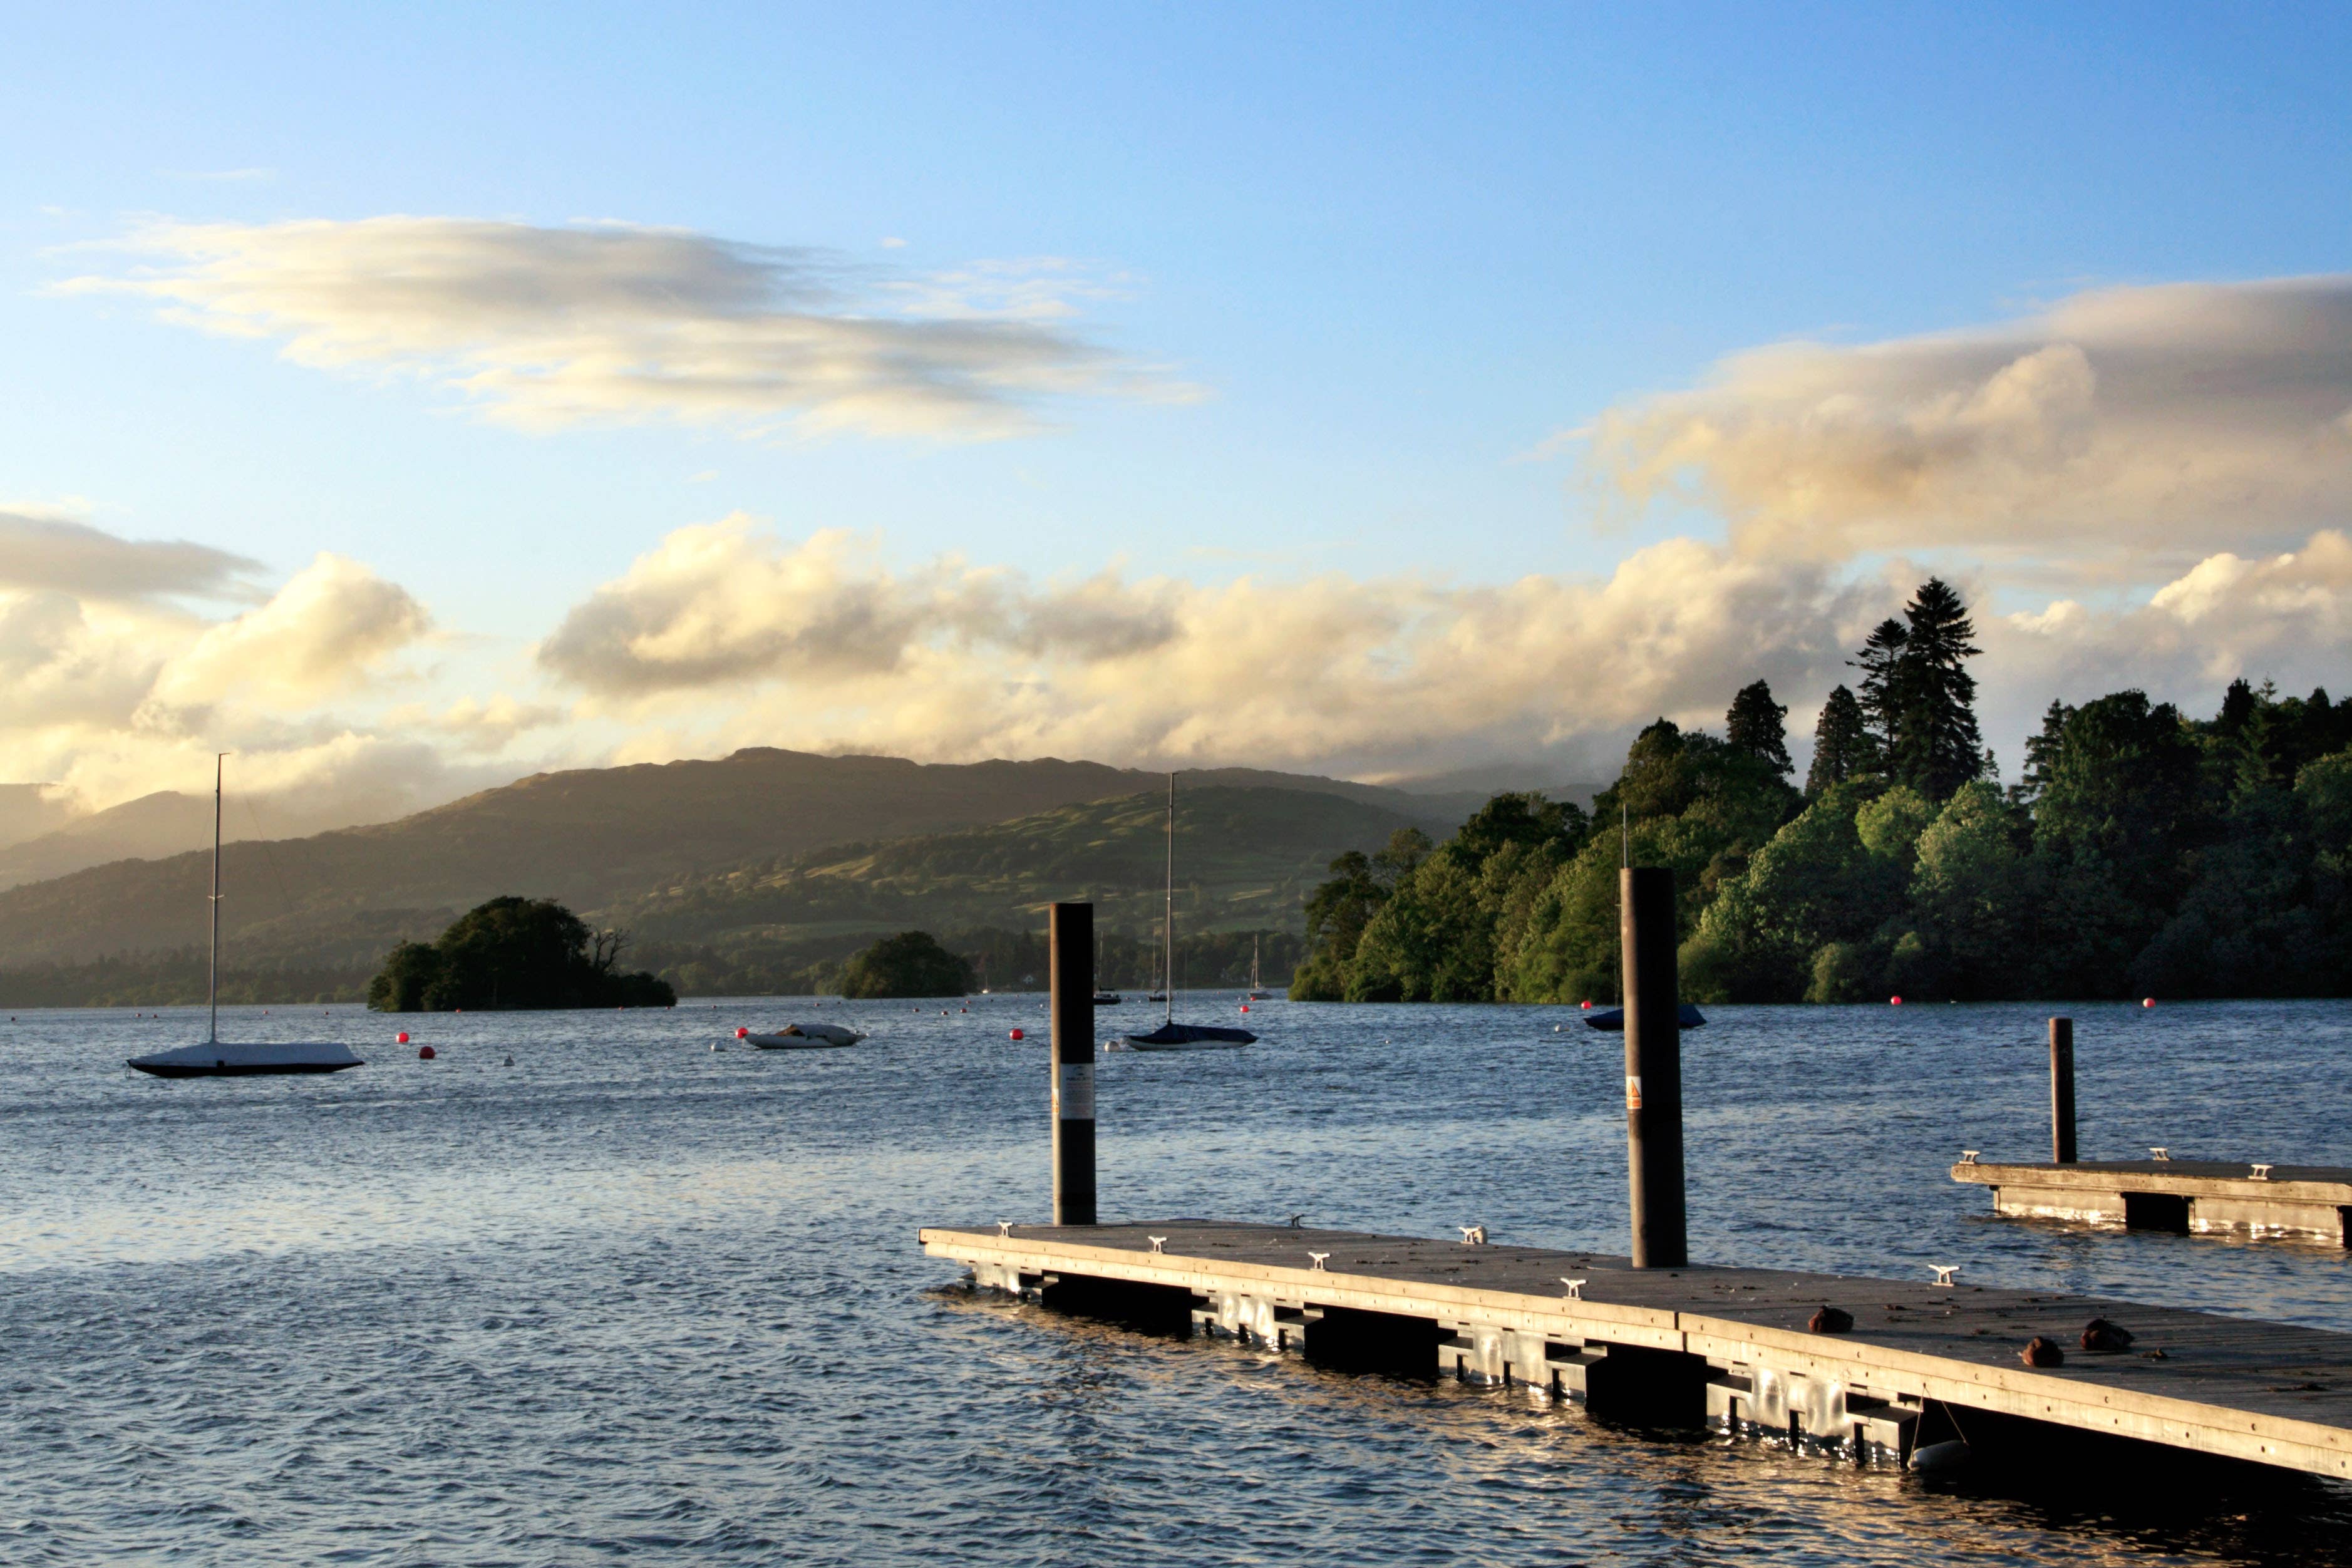 Lake Windermere at Bowness in the Lake District national park